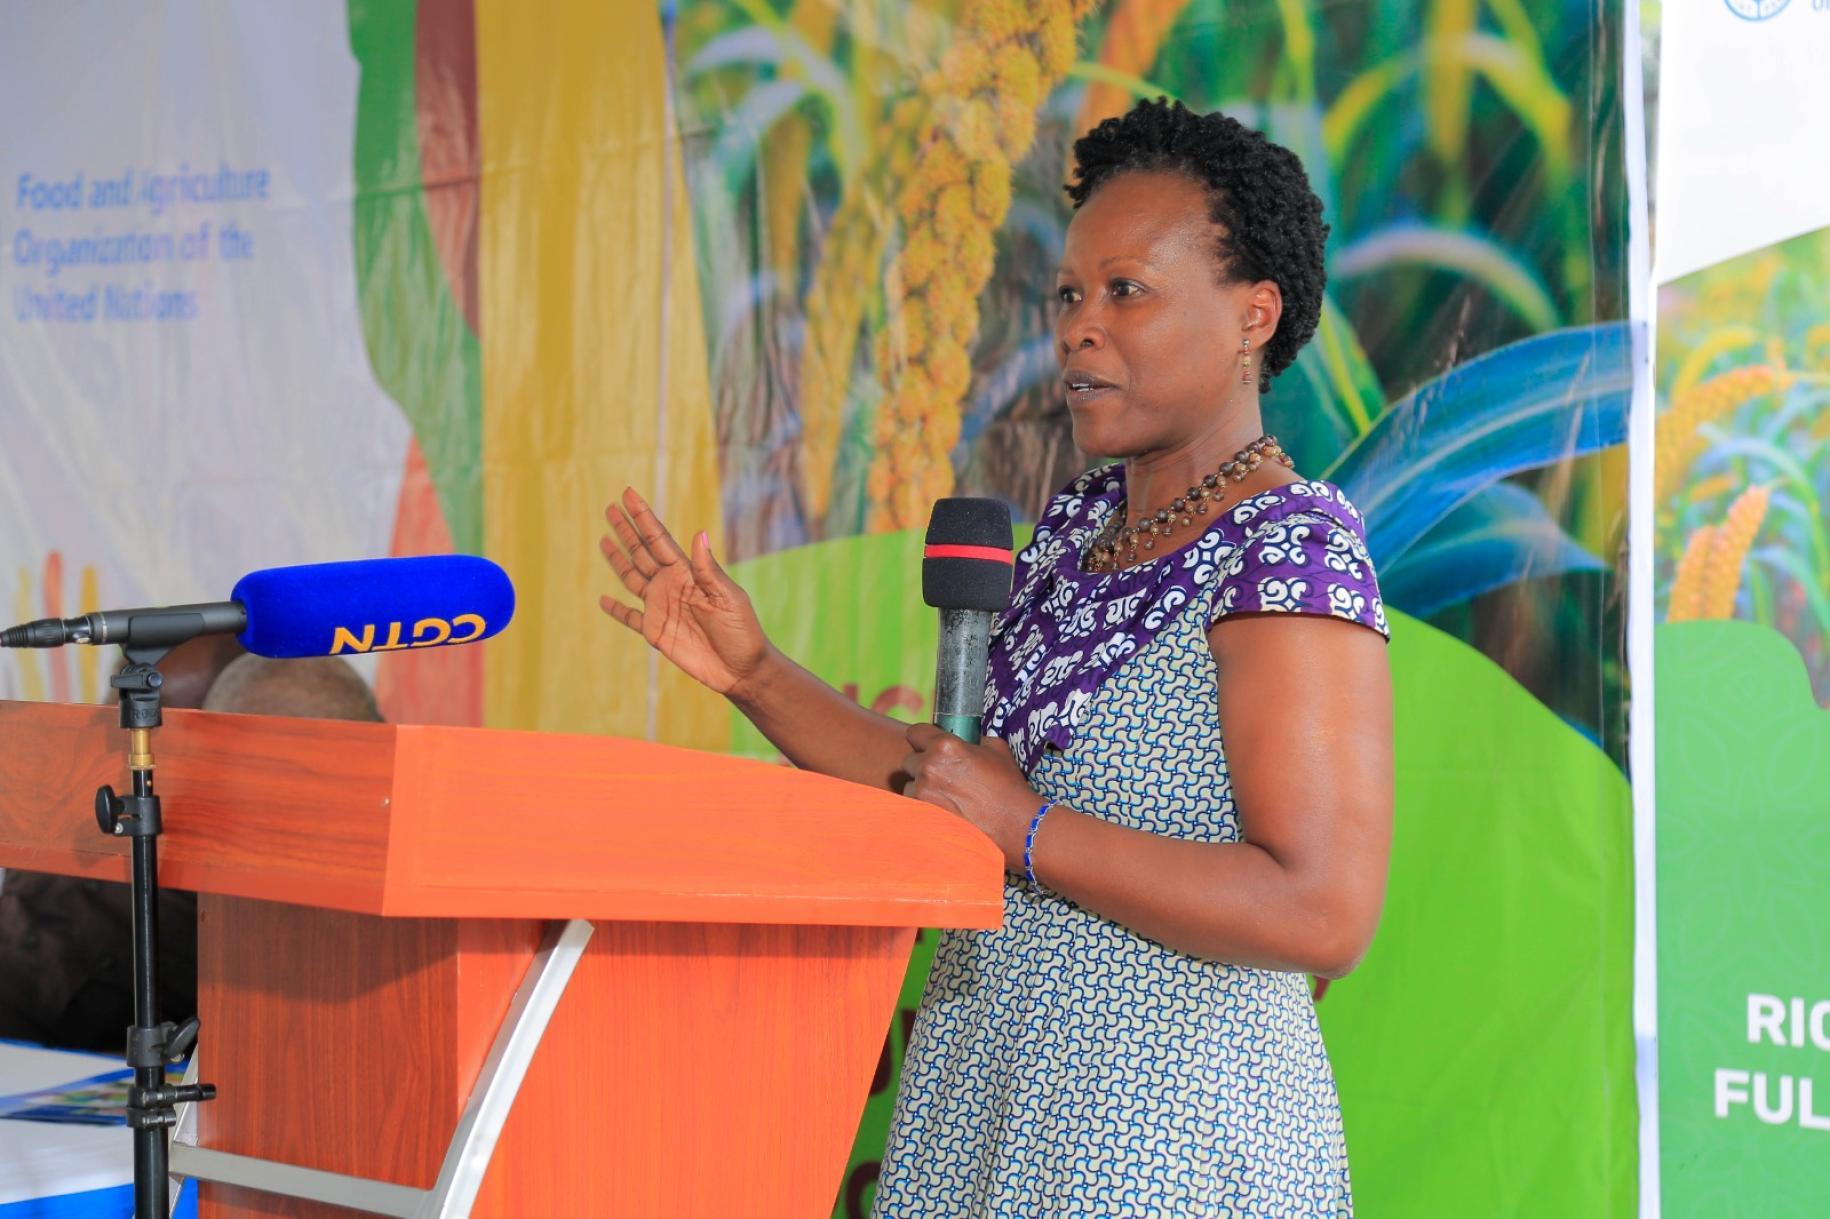 woman speaks at orange podium against a colourful wall 